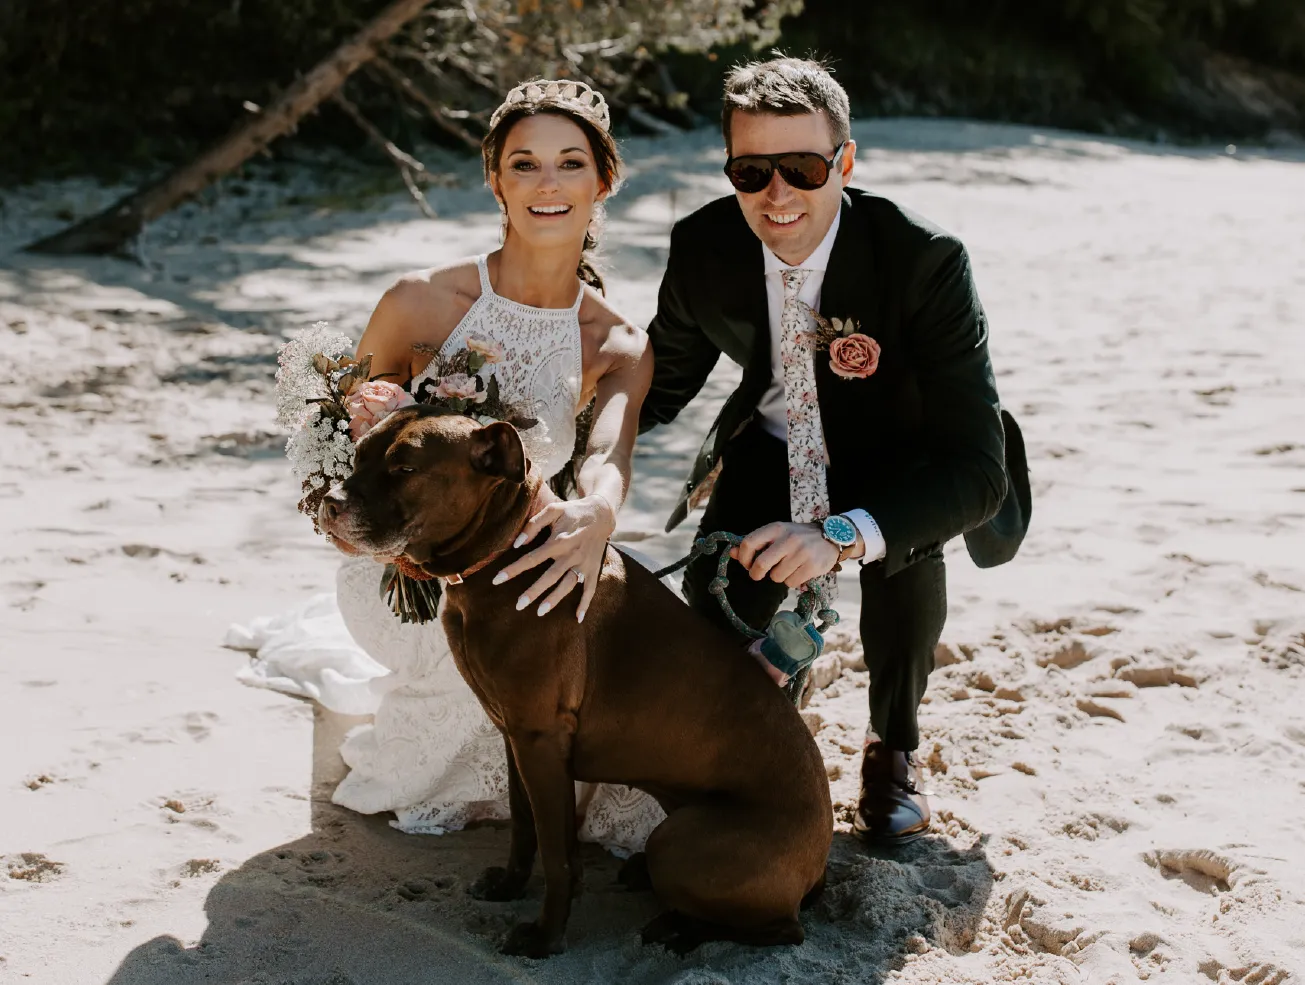 Rachel and Andrew kneeling with their dog on sand